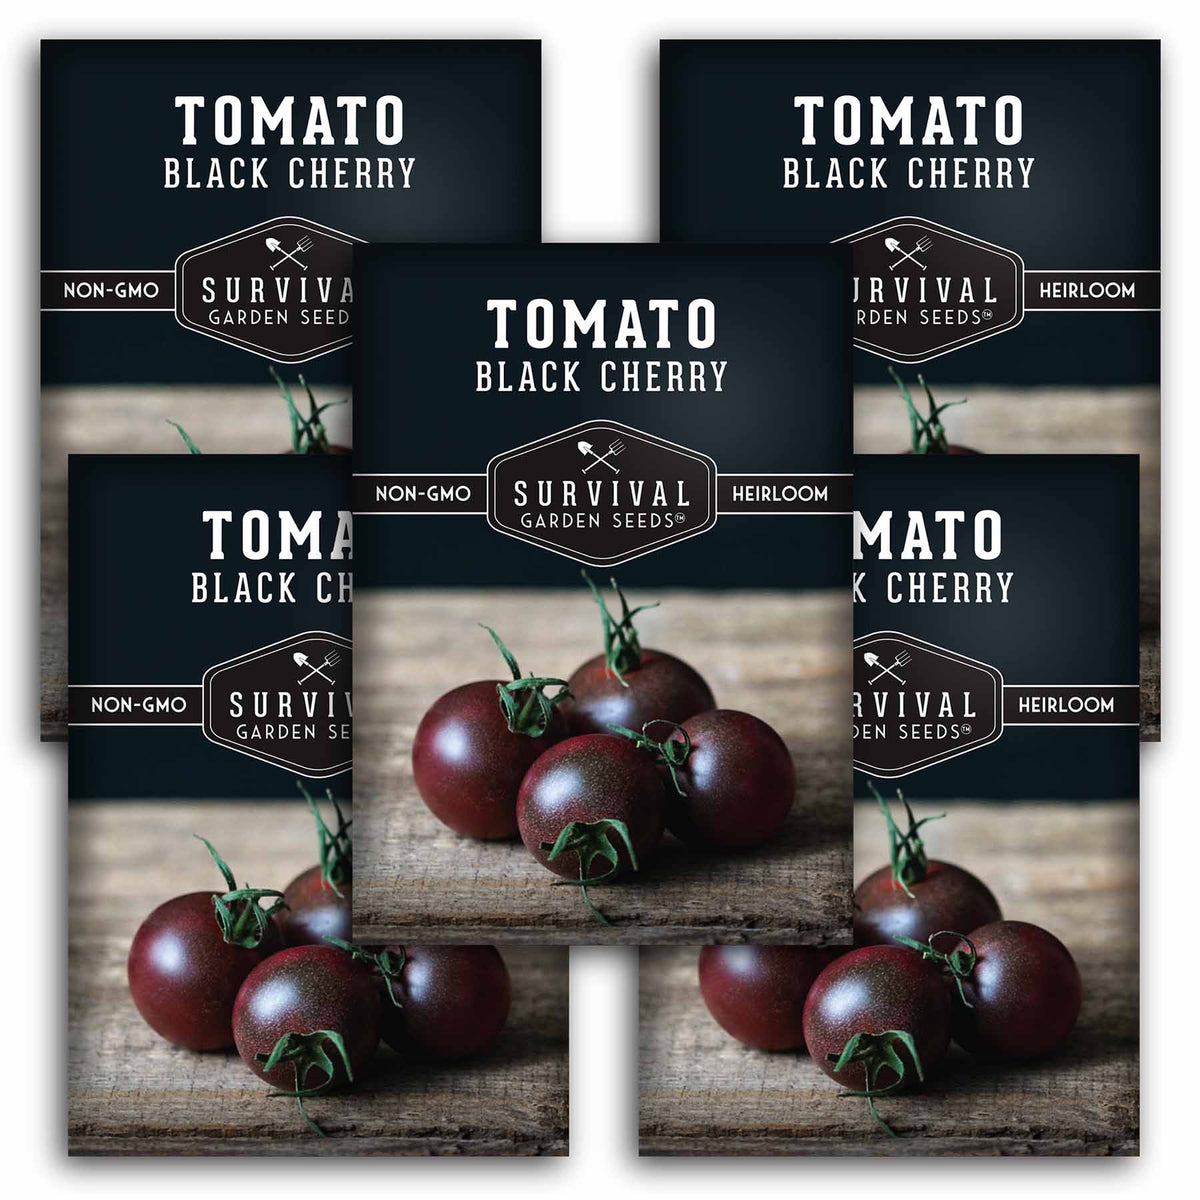 5 packets of Black Cherry Tomato seeds